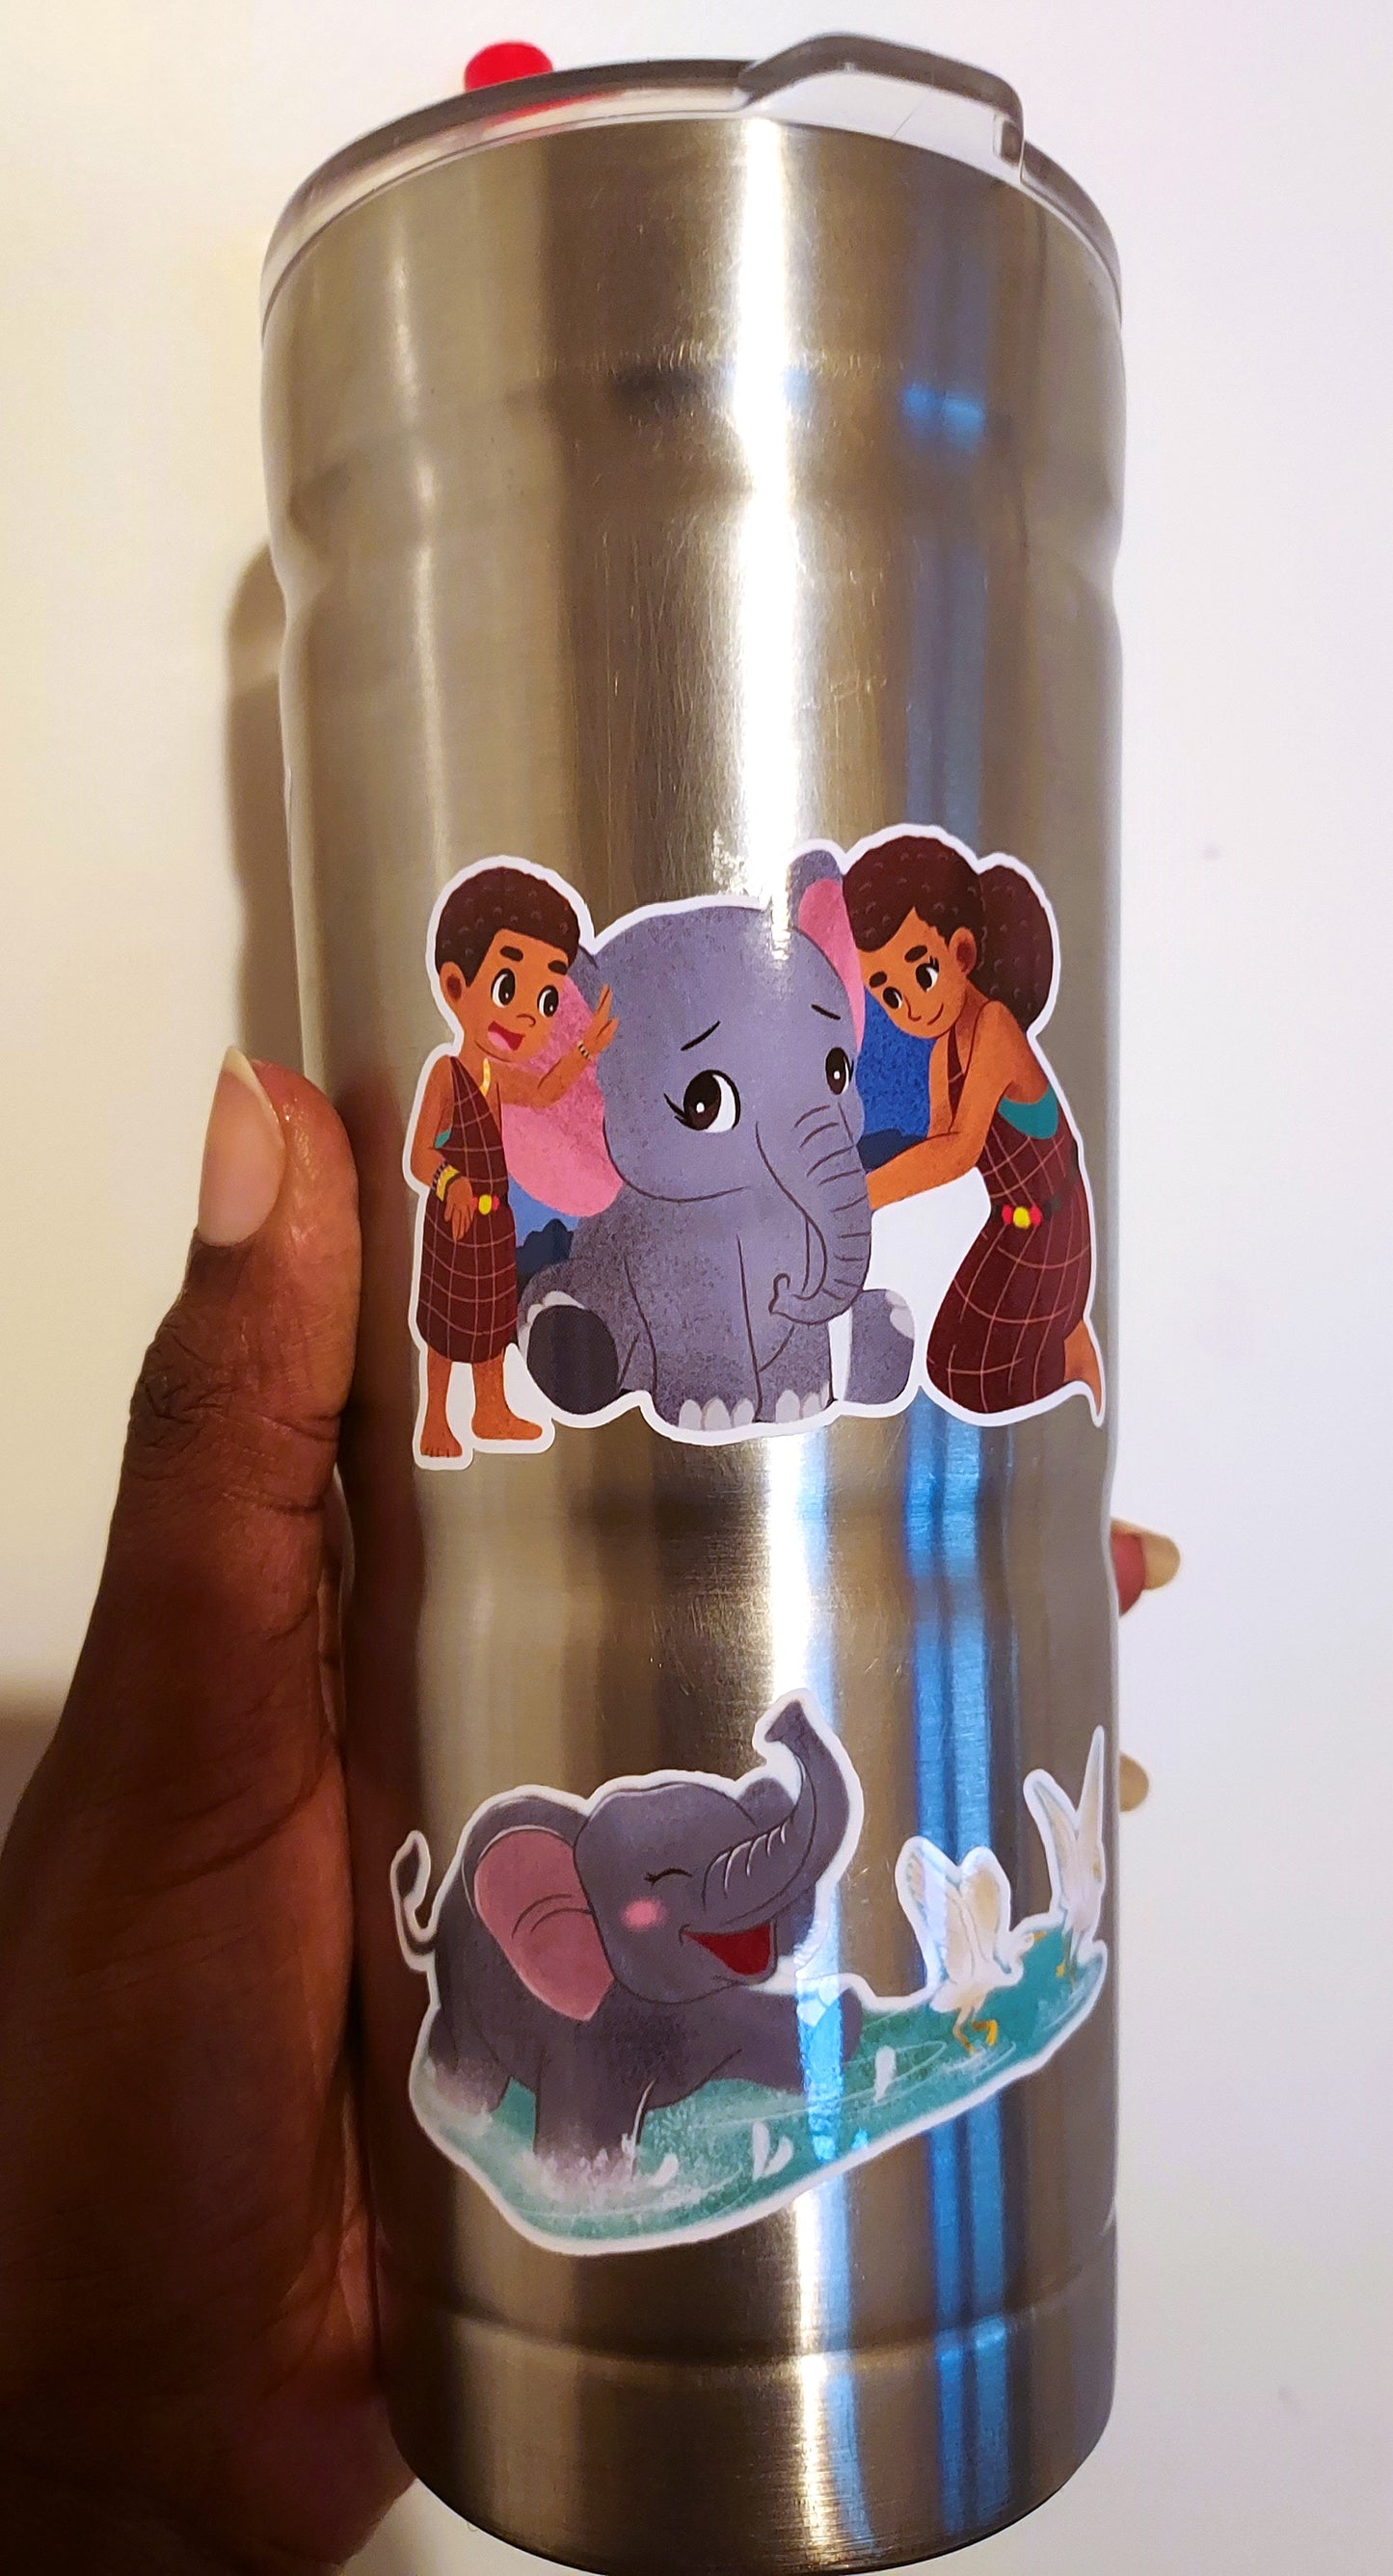 8x8 inch Sticker Sheet of Amara and her Friends | Die-Cut Water-resistant Elephant Stickers | Outdoor and Indoor Stickers | Bottle Stickers